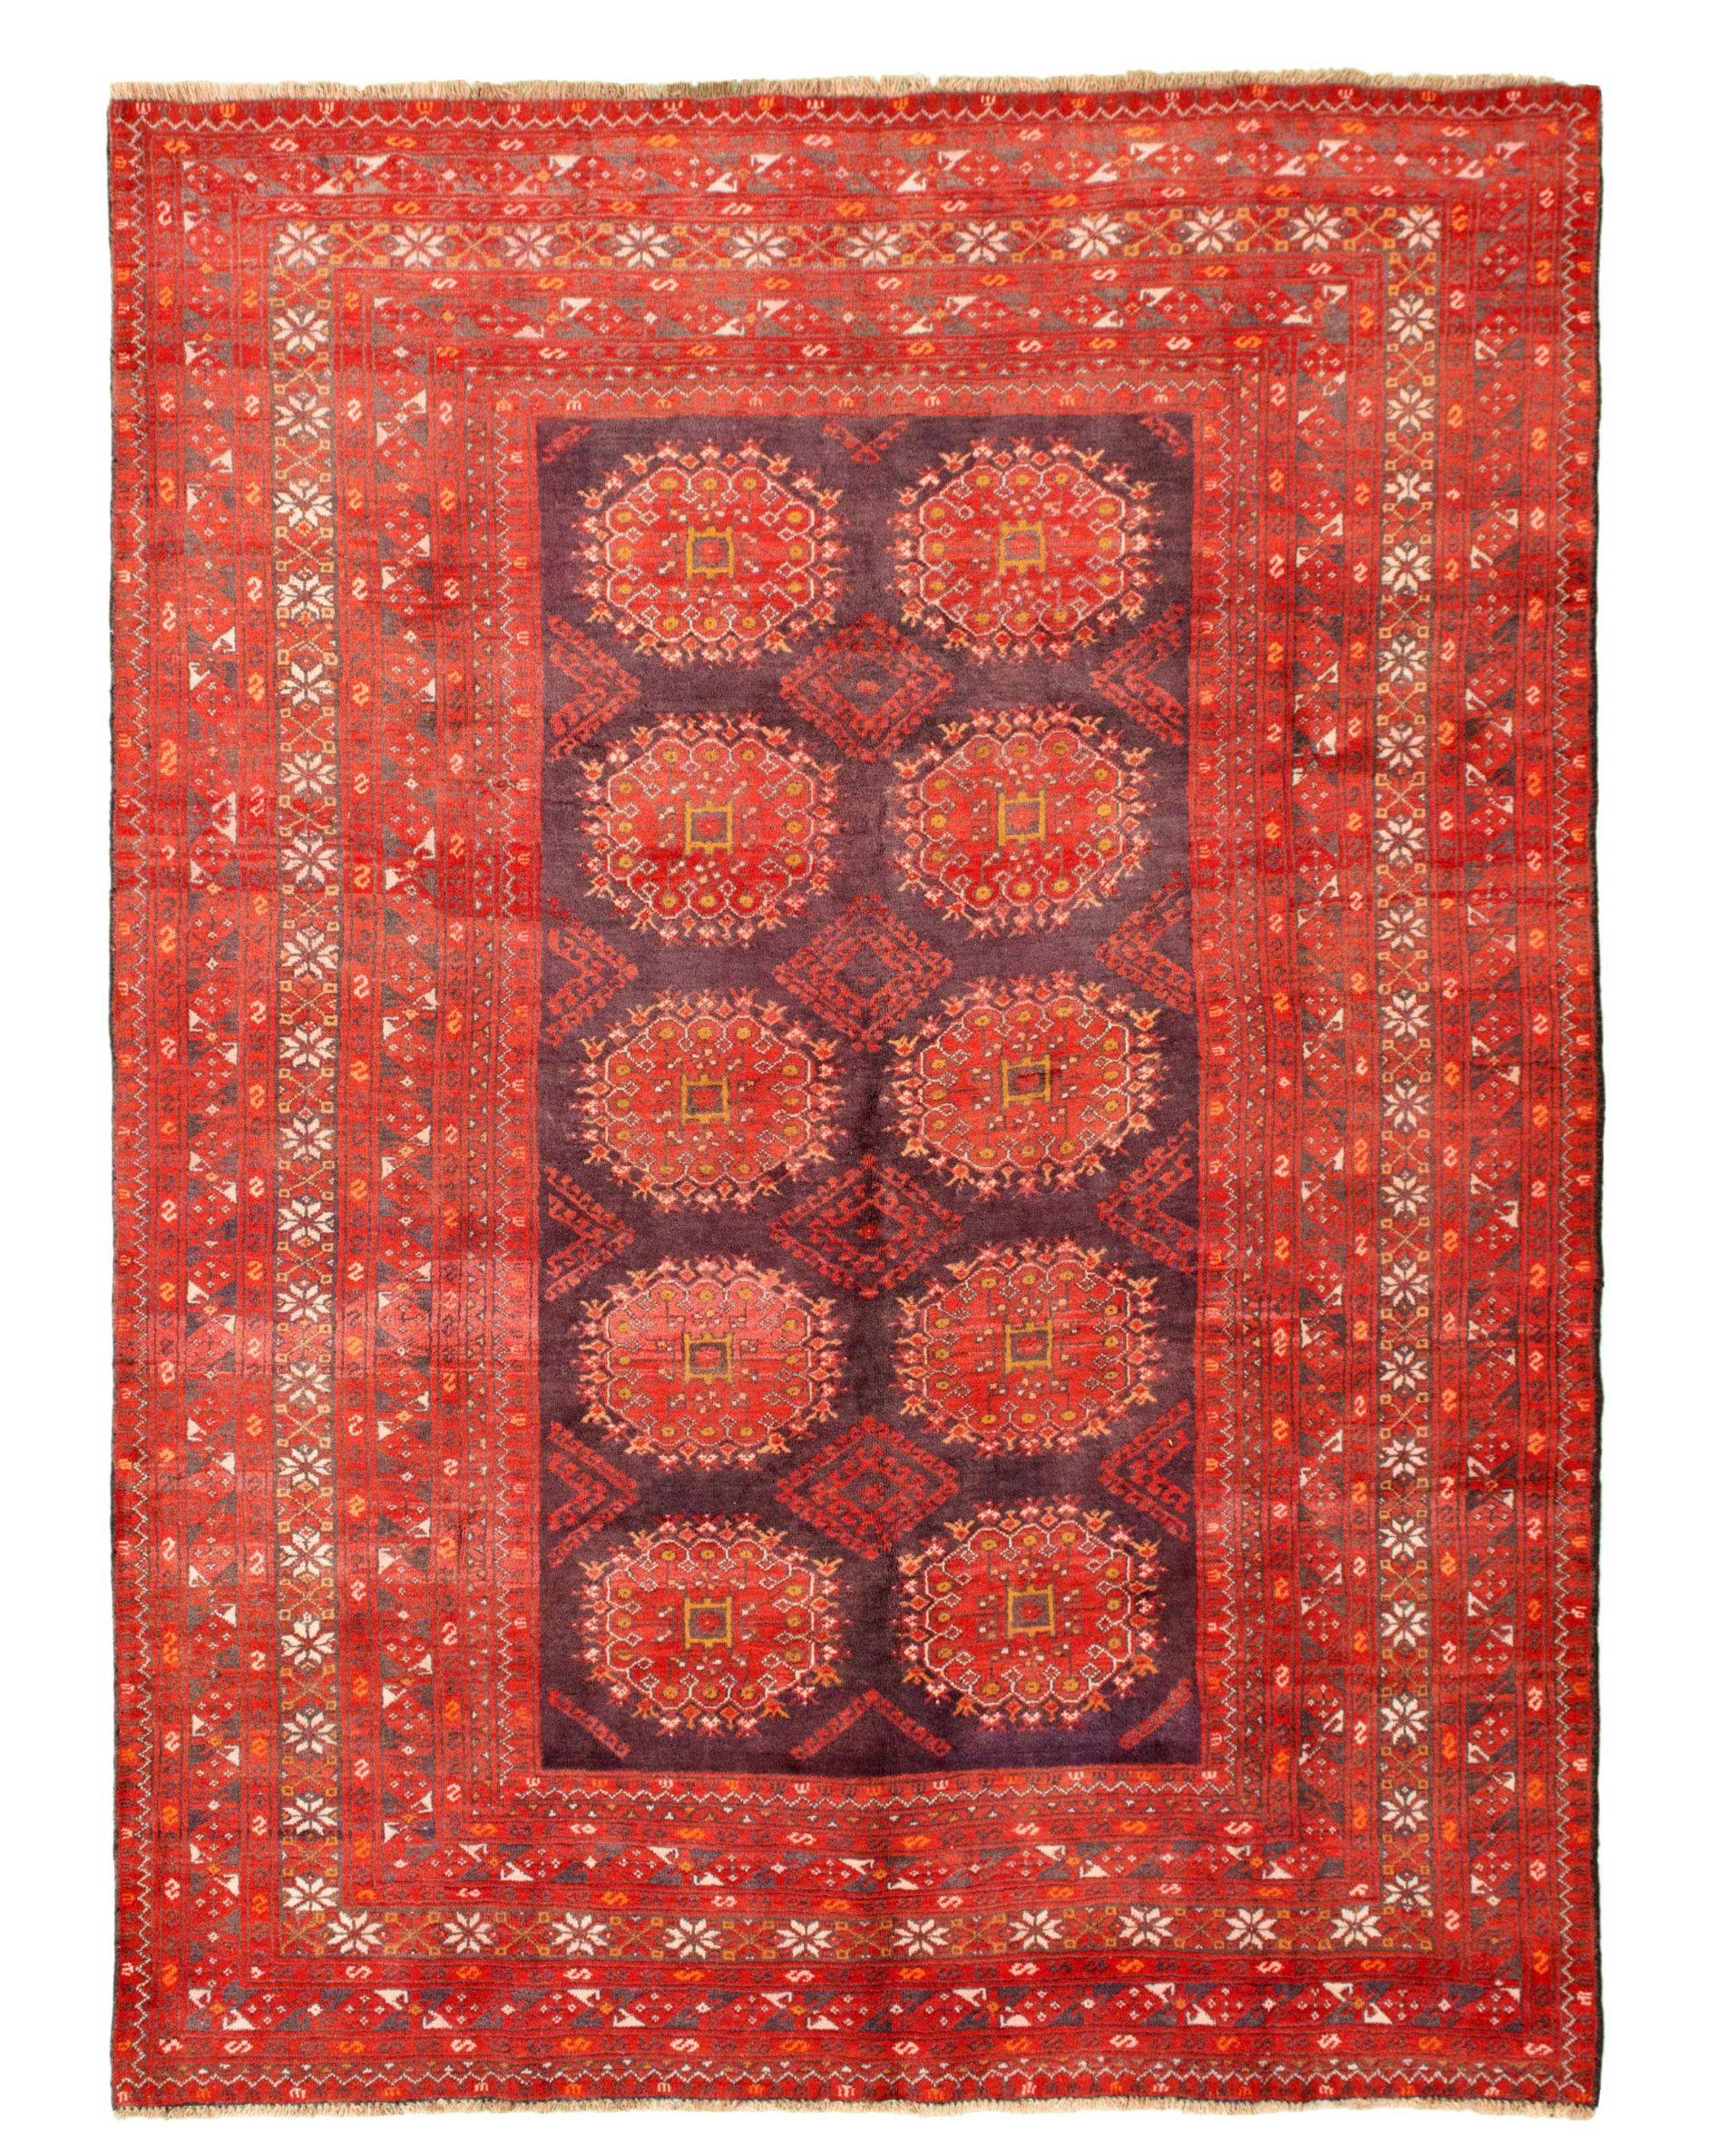 Hand-knotted Authentic Turkish Red Wool Rug 6'7" x 9'0"  Size: 6'7" x 9'0"  